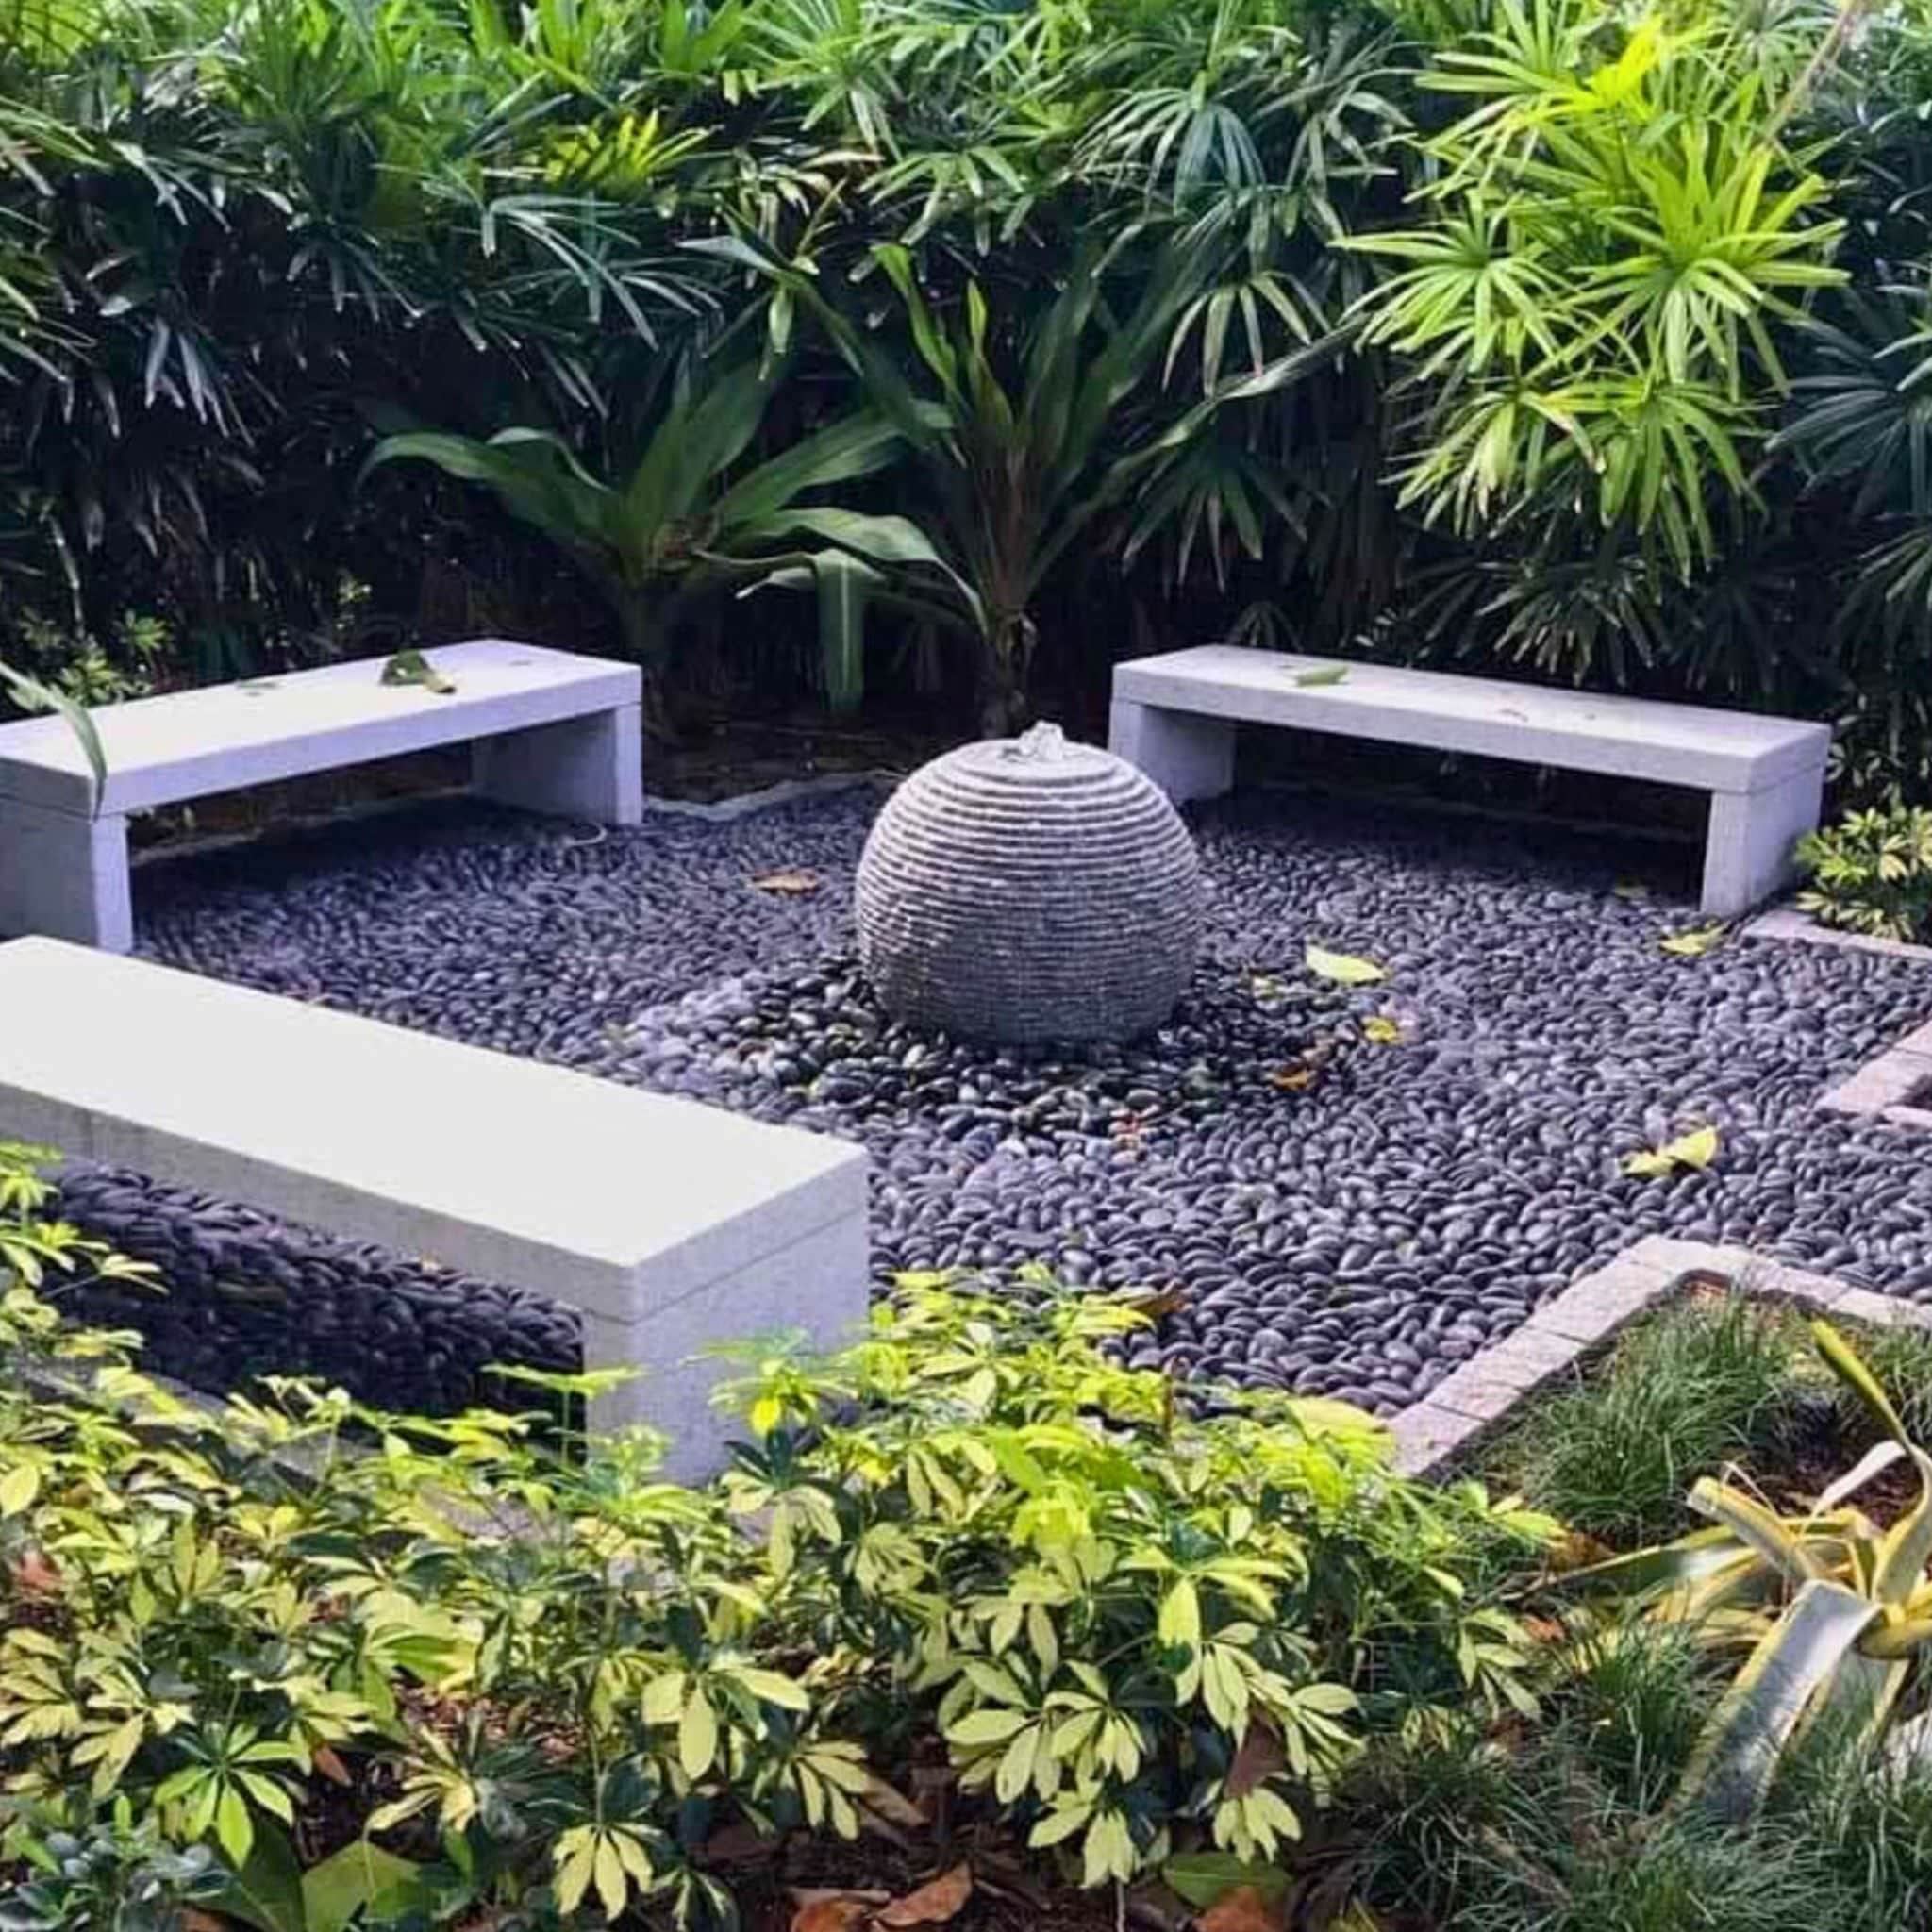 Gray Ribbed Granite Sphere Fountain - Complete Kit - Blue Thumb